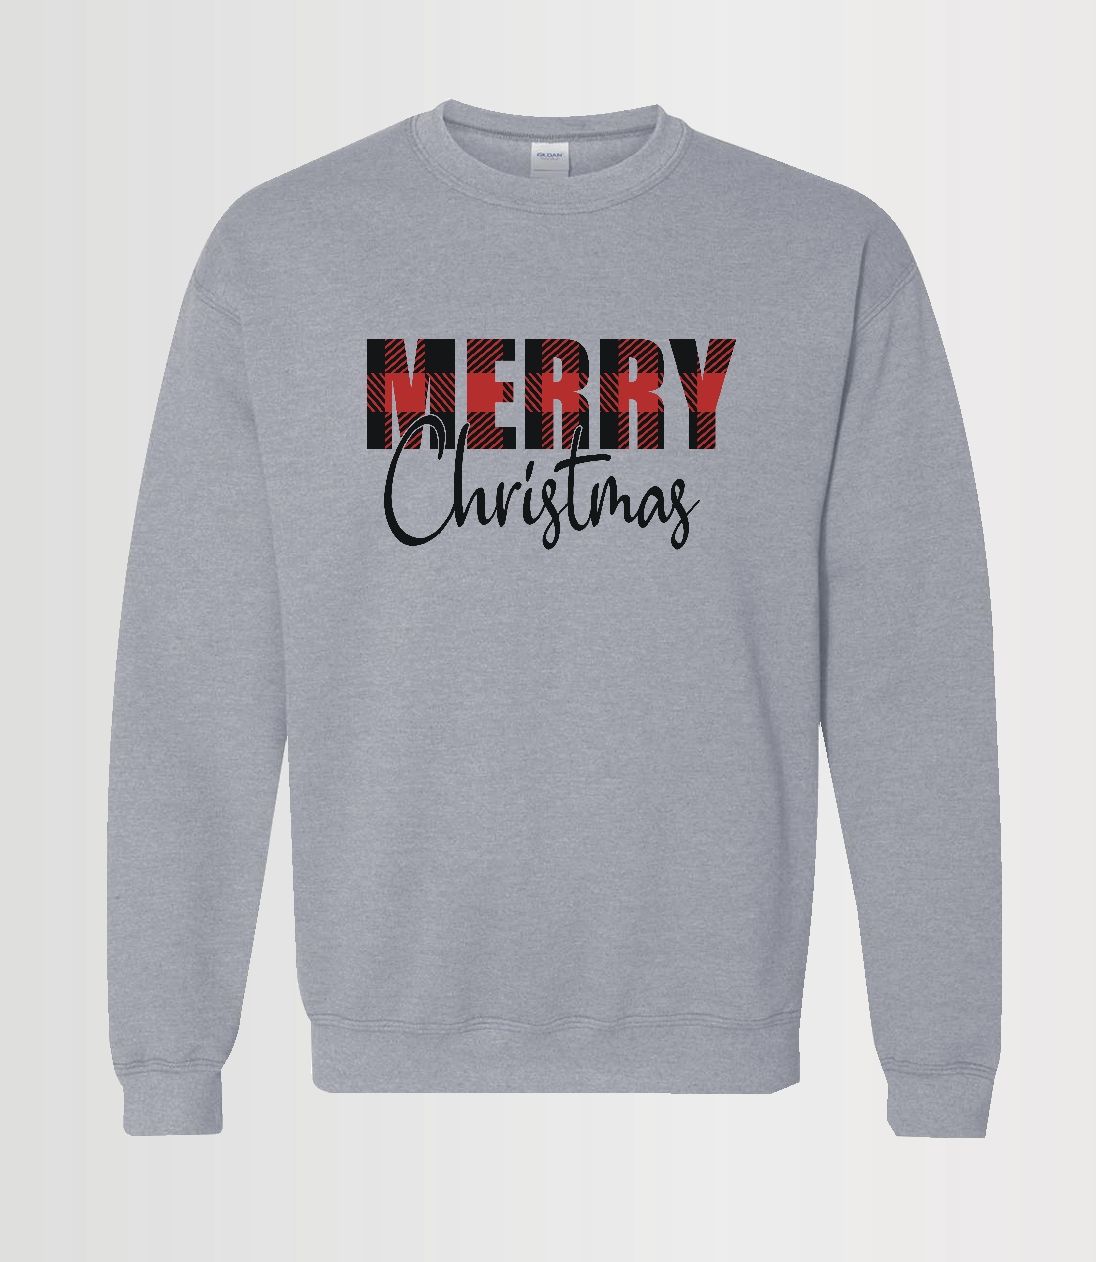 Custom sport grey crew neck with Merry in Siser plaid and Christmas in Siser black